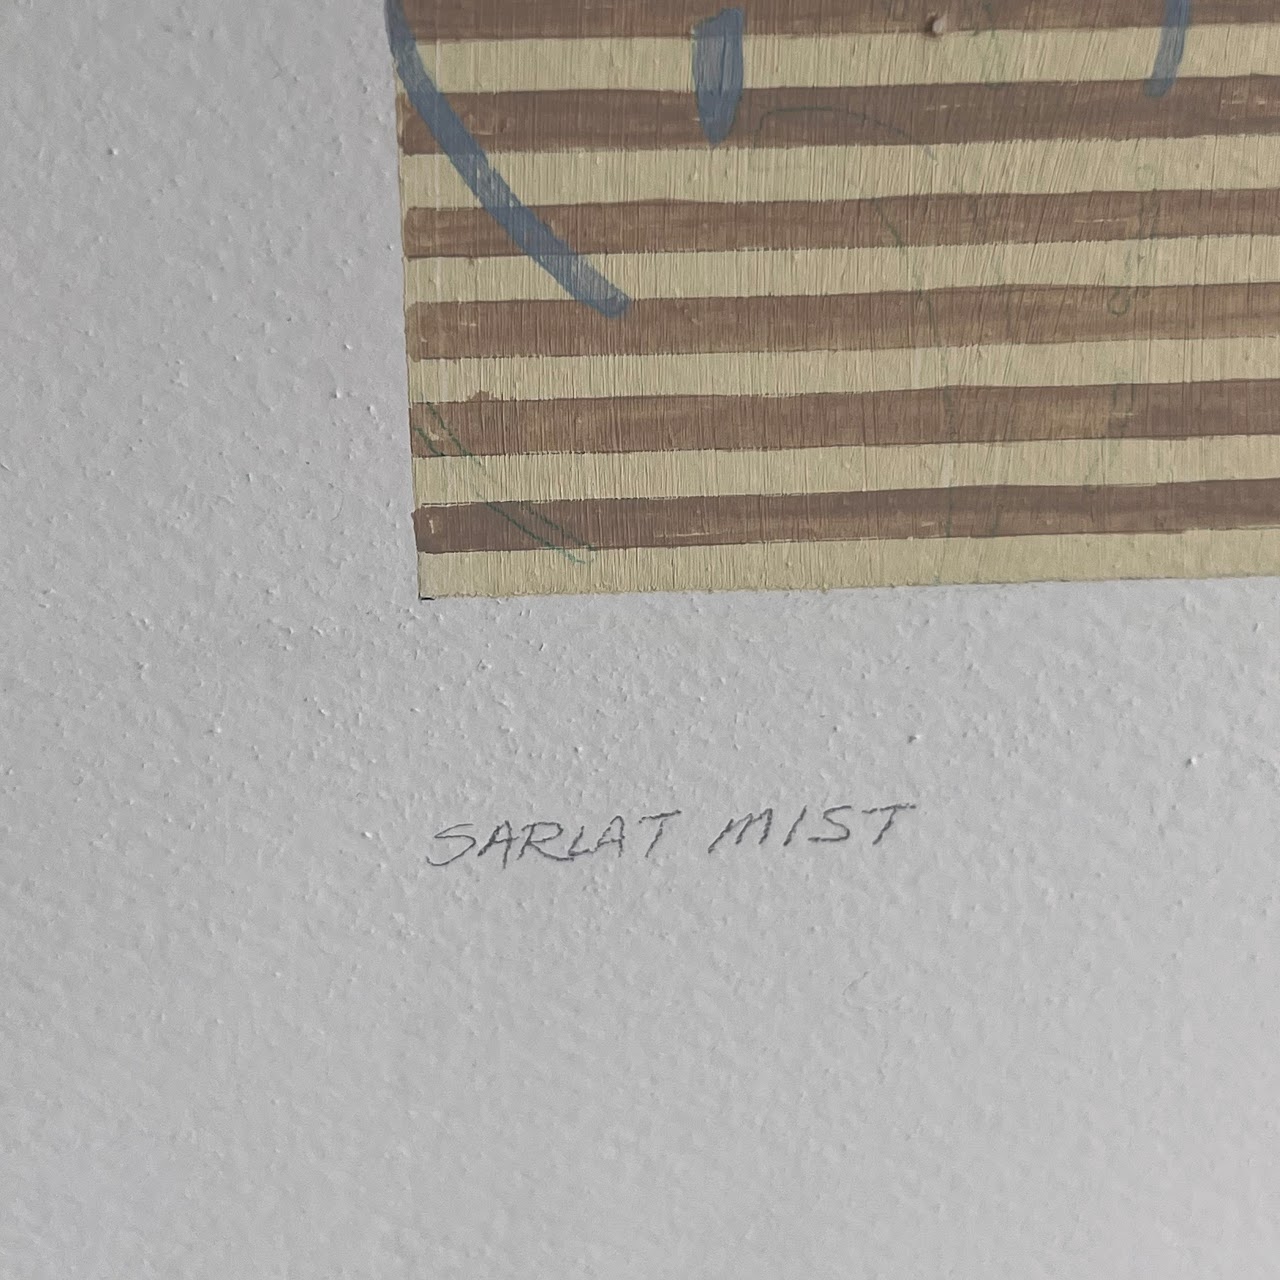 Hamrick 'Sarlat Mist' Signed Gouache and Pencil Abstract Painting